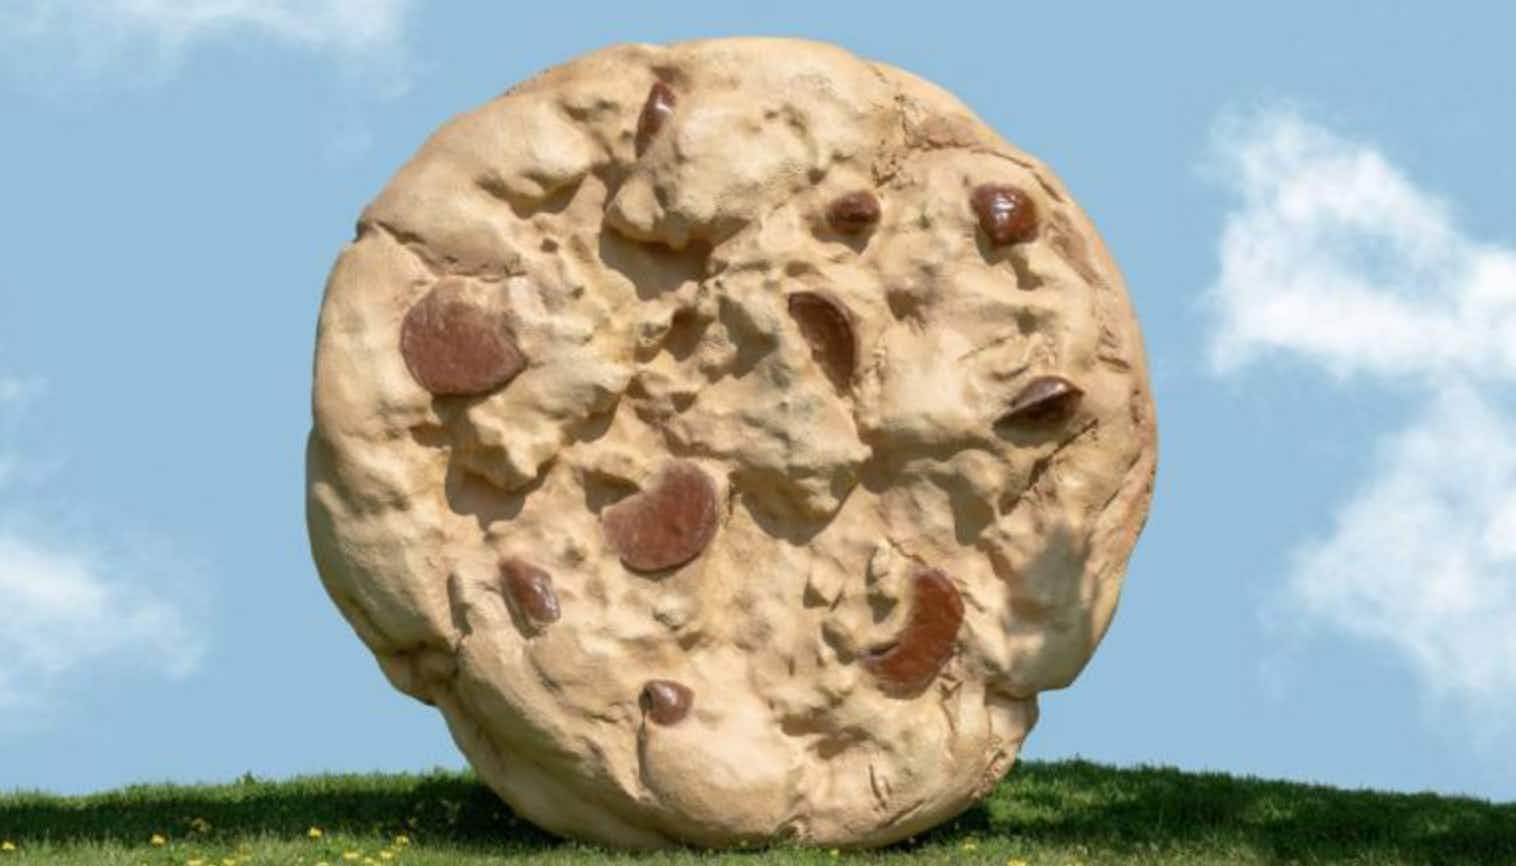 a giant cookie statue from Crumbl Cookies